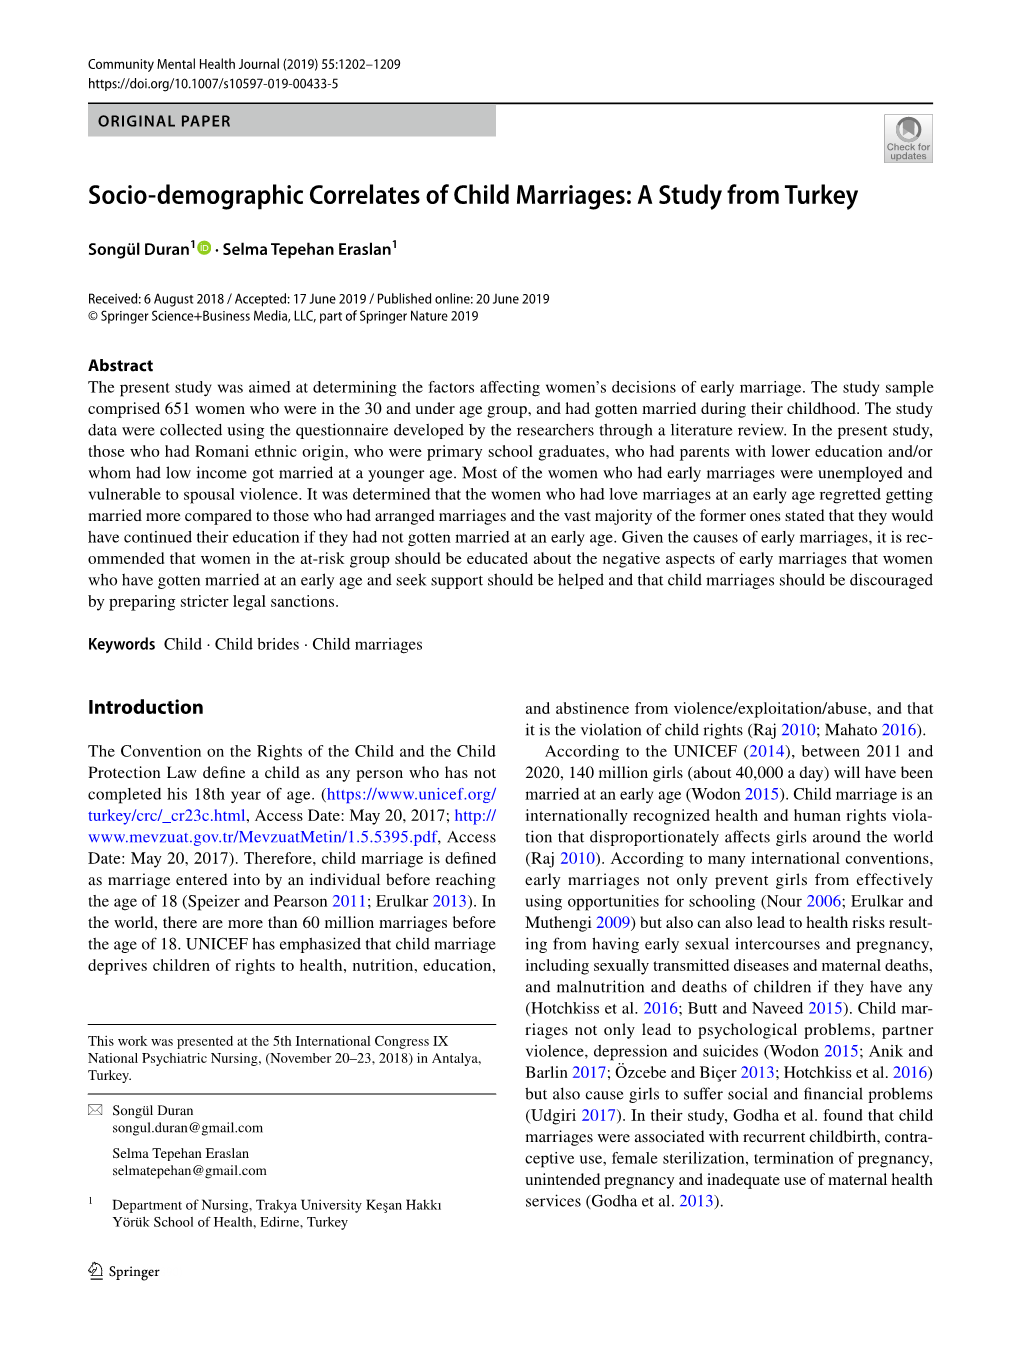 Socio-Demographic Correlates of Child Marriages: a Study from Turkey